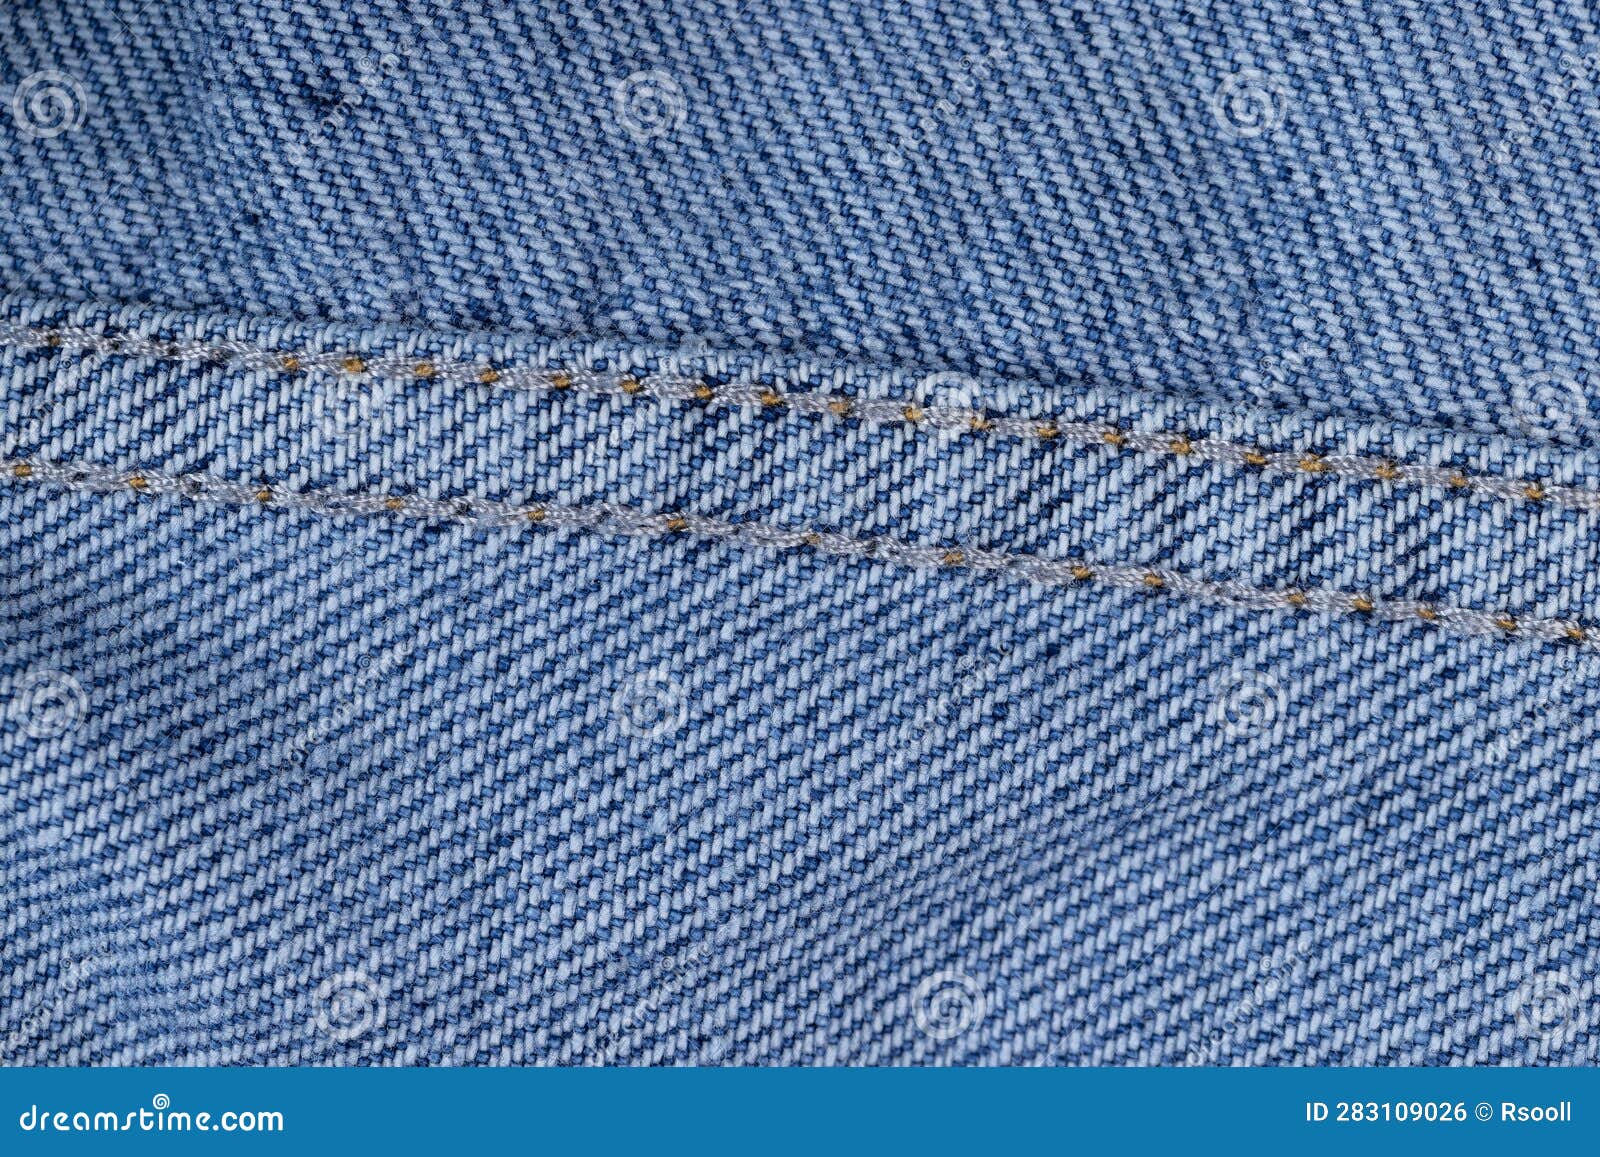 Details of a Blue Denim Fabric Made of Natural Cotton Stock Photo ...